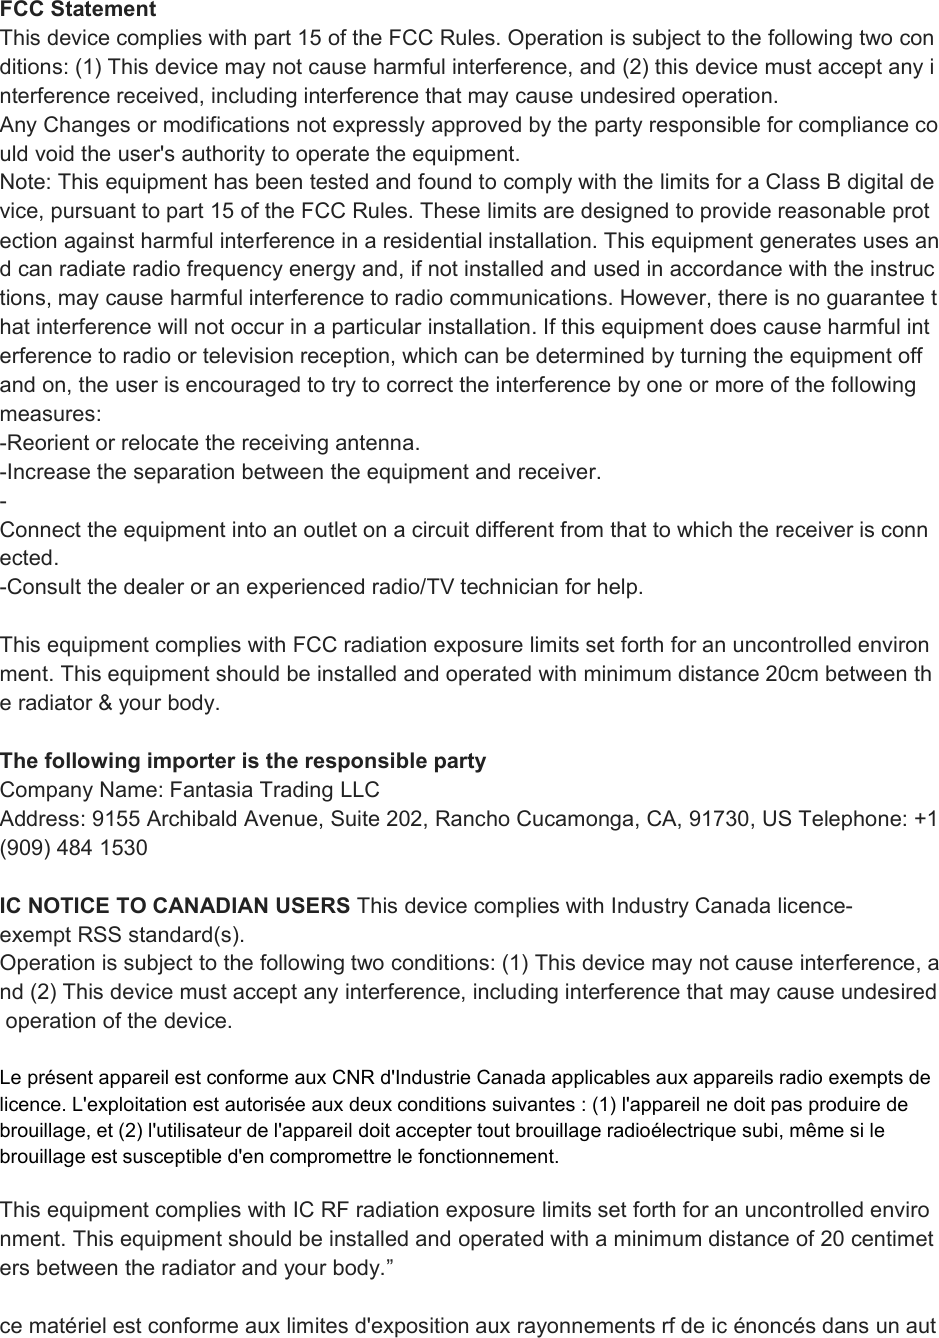 FCC StatementThis device complies with part 15 of the FCC Rules. Operation is subject to the following two conditions: (1) This device may not cause harmful interference, and (2) this device must accept any interference received, including interference that may cause undesired operation.Any Changes or modifications not expressly approved by the party responsible for compliance could void the user&apos;s authority to operate the equipment.Note: This equipment has been tested and found to comply with the limits for a Class B digital device, pursuant to part 15 of the FCC Rules. These limits are designed to provide reasonable protection against harmful interference in a residential installation. This equipment generates uses and can radiate radio frequency energy and, if not installed and used in accordance with the instructions, may cause harmful interference to radio communications. However, there is no guarantee that interference will not occur in a particular installation. If this equipment does cause harmful interference to radio or television reception, which can be determined by turning the equipment offand on, the user is encouraged to try to correct the interference by one or more of the followingmeasures:-Reorient or relocate the receiving antenna.-Increase the separation between the equipment and receiver.-Connect the equipment into an outlet on a circuit different from that to which the receiver is connected.-Consult the dealer or an experienced radio/TV technician for help.This equipment complies with FCC radiation exposure limits set forth for an uncontrolled environment. This equipment should be installed and operated with minimum distance 20cm between the radiator &amp; your body.The following importer is the responsible partyCompany Name: Fantasia Trading LLCAddress: 9155 Archibald Avenue, Suite 202, Rancho Cucamonga, CA, 91730, US Telephone: +1(909) 484 1530IC NOTICE TO CANADIAN USERS This device complies with Industry Canada licence-exempt RSS standard(s).Operation is subject to the following two conditions: (1) This device may not cause interference, and (2) This device must accept any interference, including interference that may cause undesiredoperation of the device.Le présent appareil est conforme aux CNR d&apos;Industrie Canada applicables aux appareils radio exempts delicence. L&apos;exploitation est autorisée aux deux conditions suivantes : (1) l&apos;appareil ne doit pas produire debrouillage, et (2) l&apos;utilisateur de l&apos;appareil doit accepter tout brouillage radioélectrique subi, même si lebrouillage est susceptible d&apos;en compromettre le fonctionnement.This equipment complies with IC RF radiation exposure limits set forth for an uncontrolled environment. This equipment should be installed and operated with a minimum distance of 20 centimeters between the radiator and your body.”ce matériel est conforme aux limites d&apos;exposition aux rayonnements rf de ic énoncés dans un aut